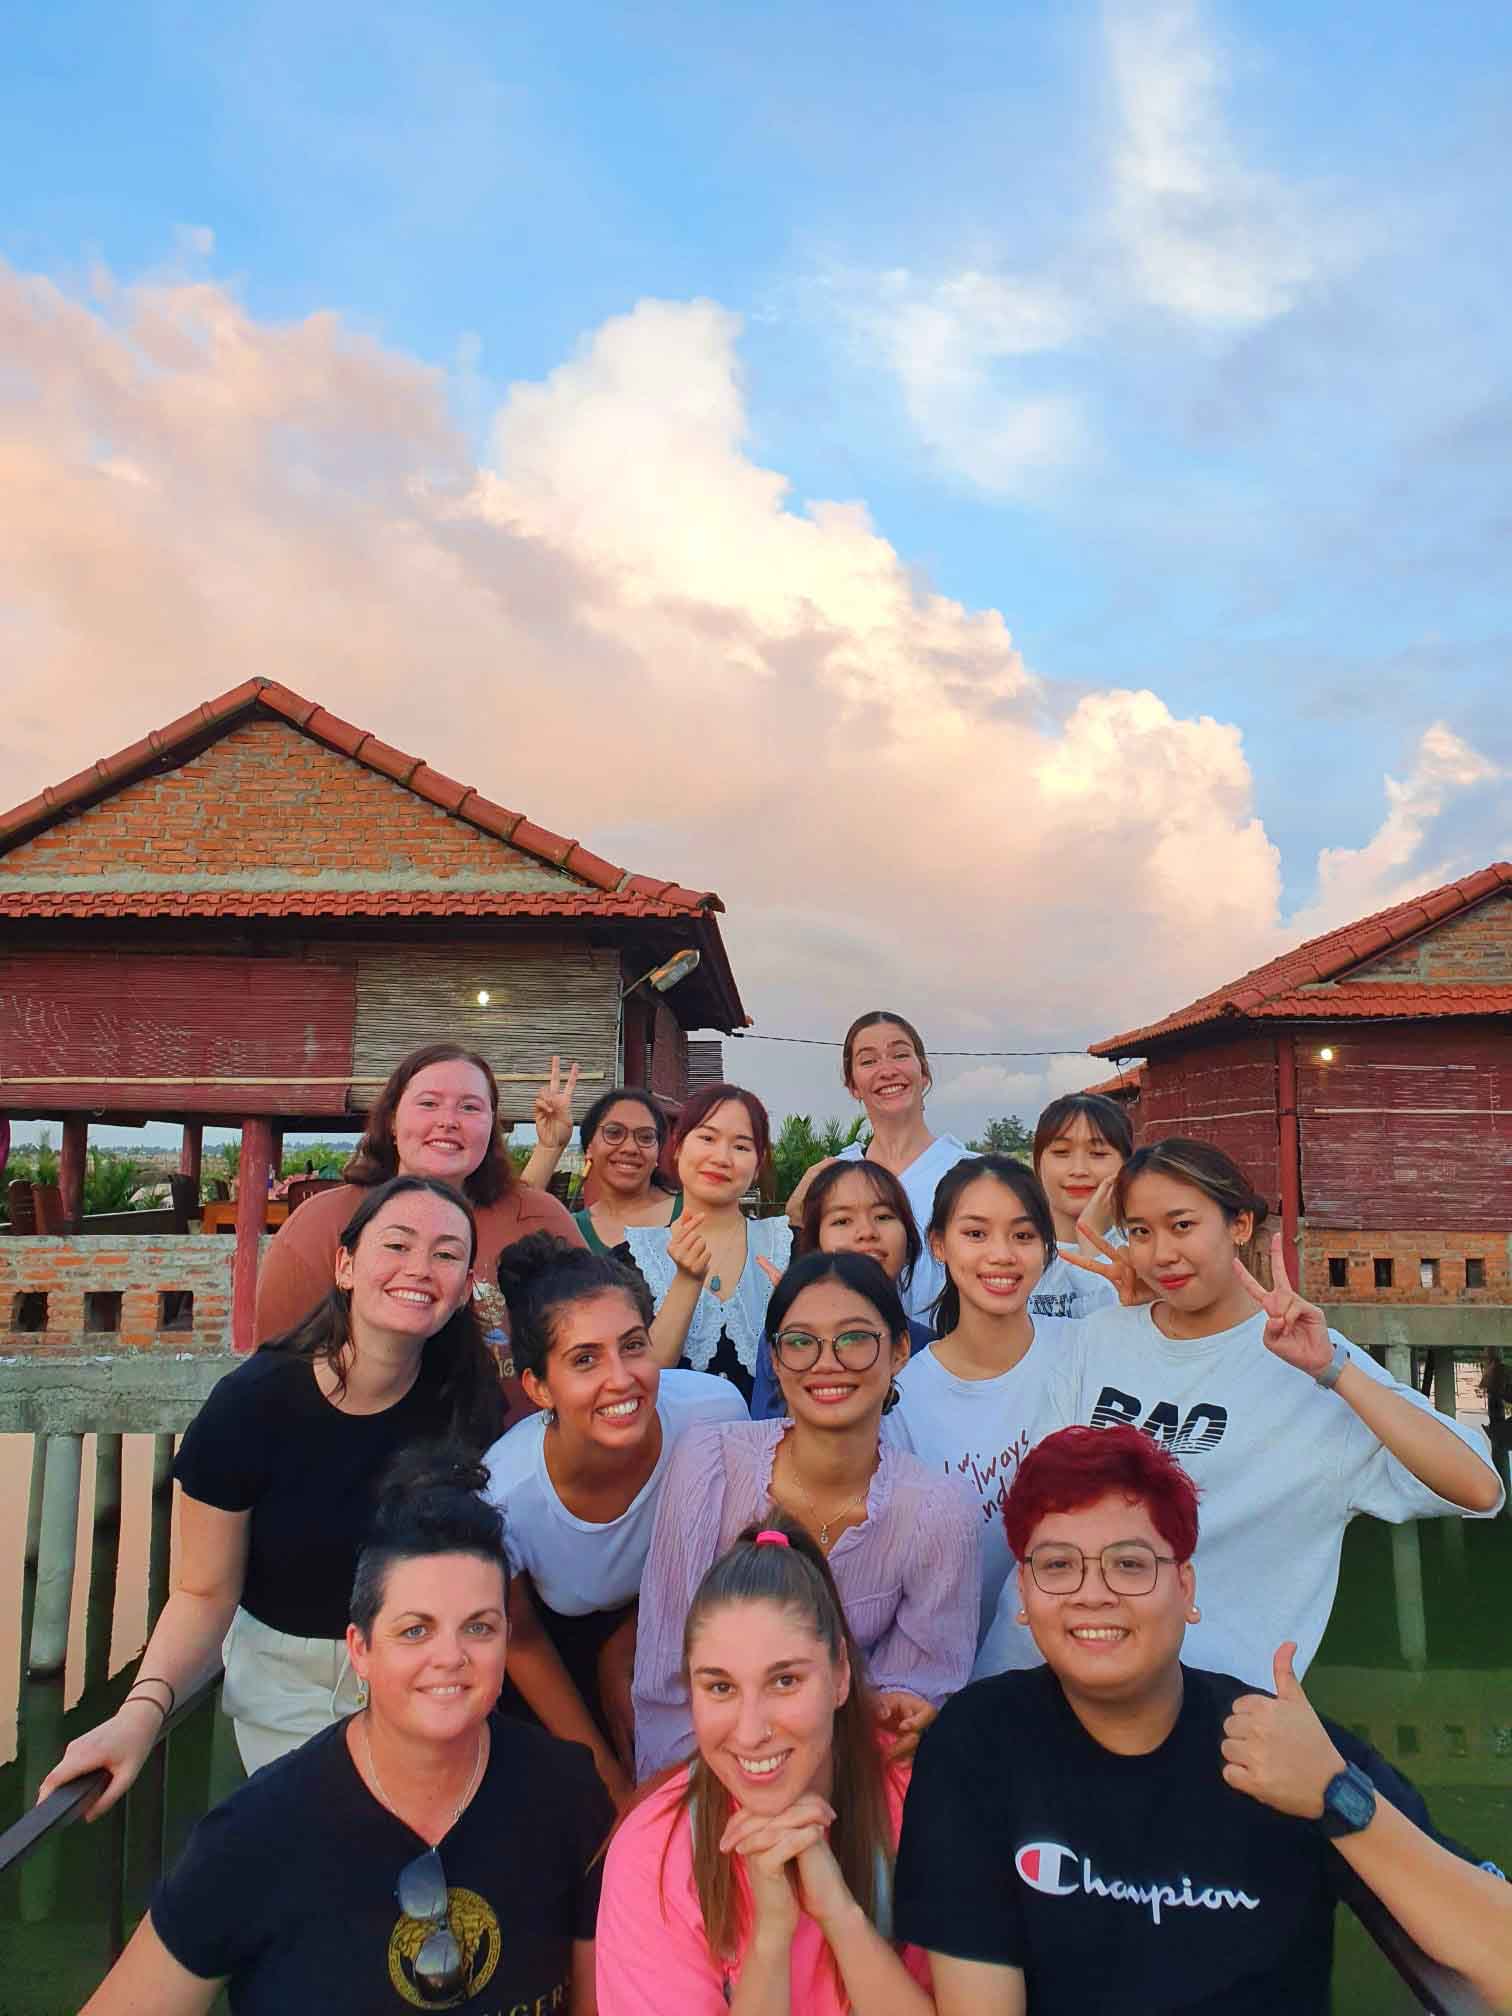 Happy students taking a selfie in warm afternoon light in front of wooden Vietnamese buildings.